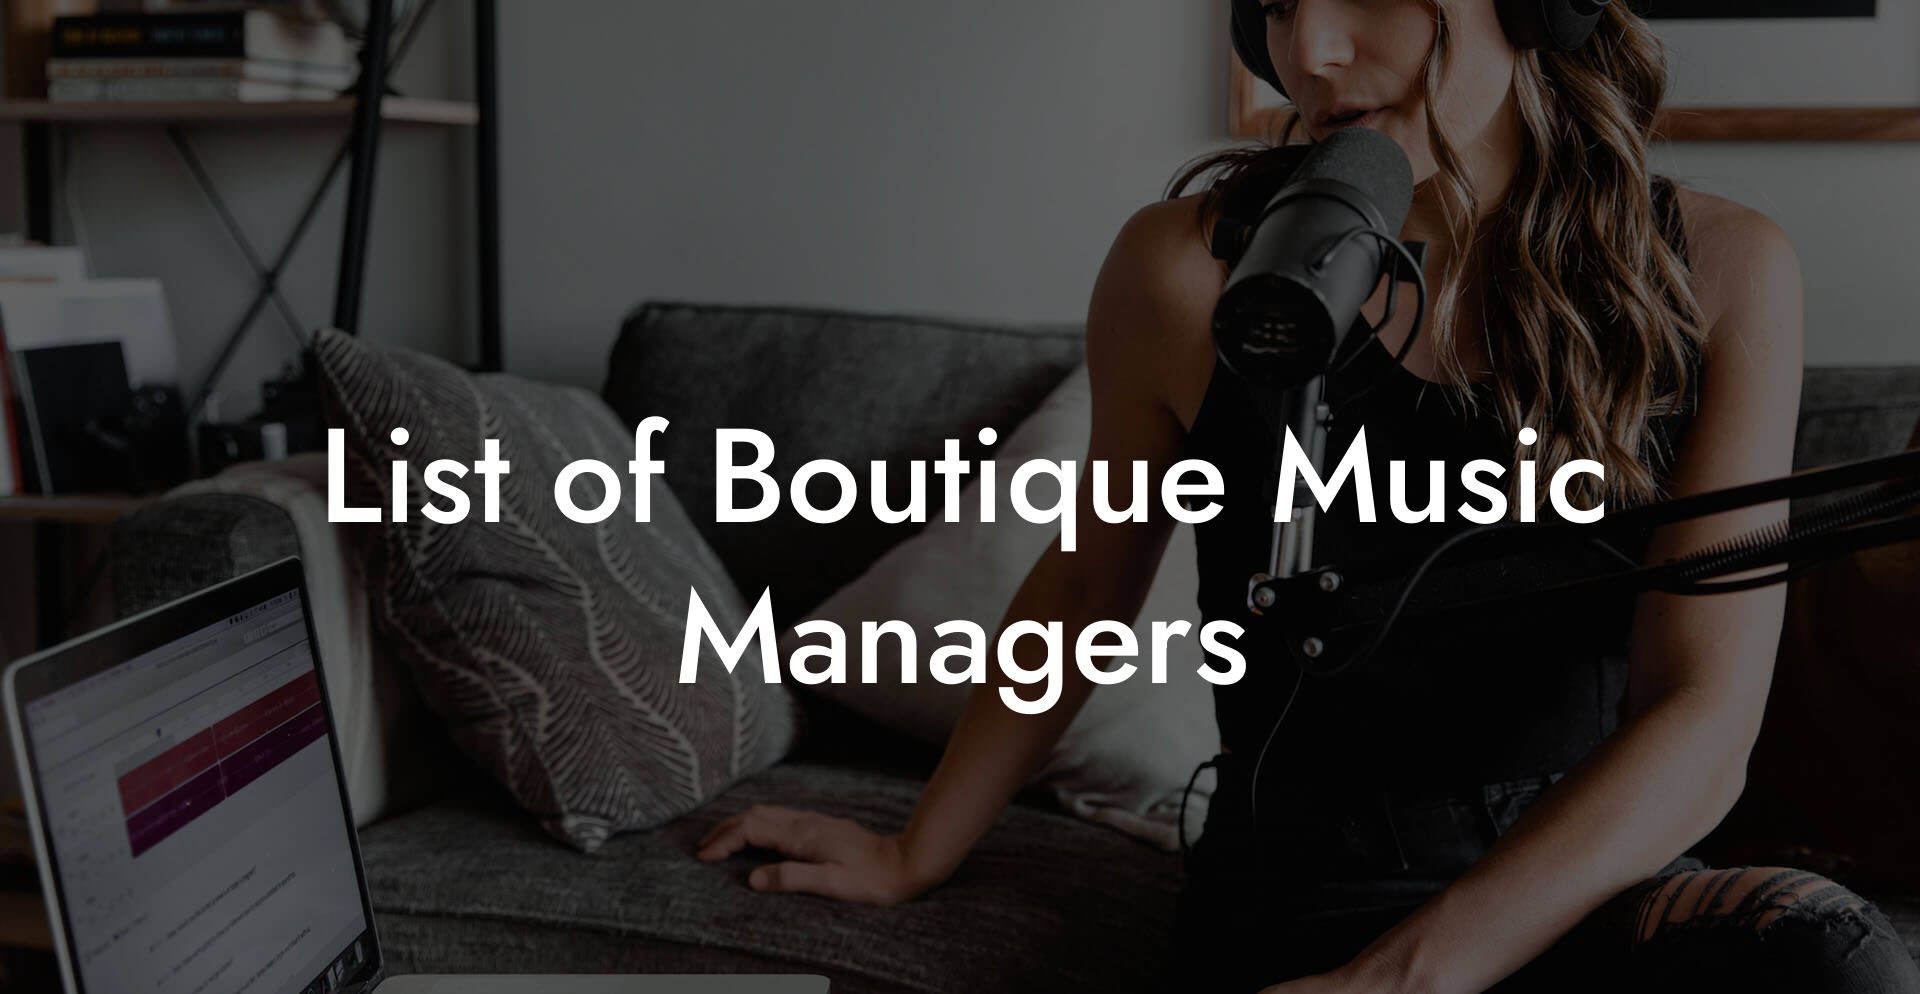 List of Boutique Music Managers